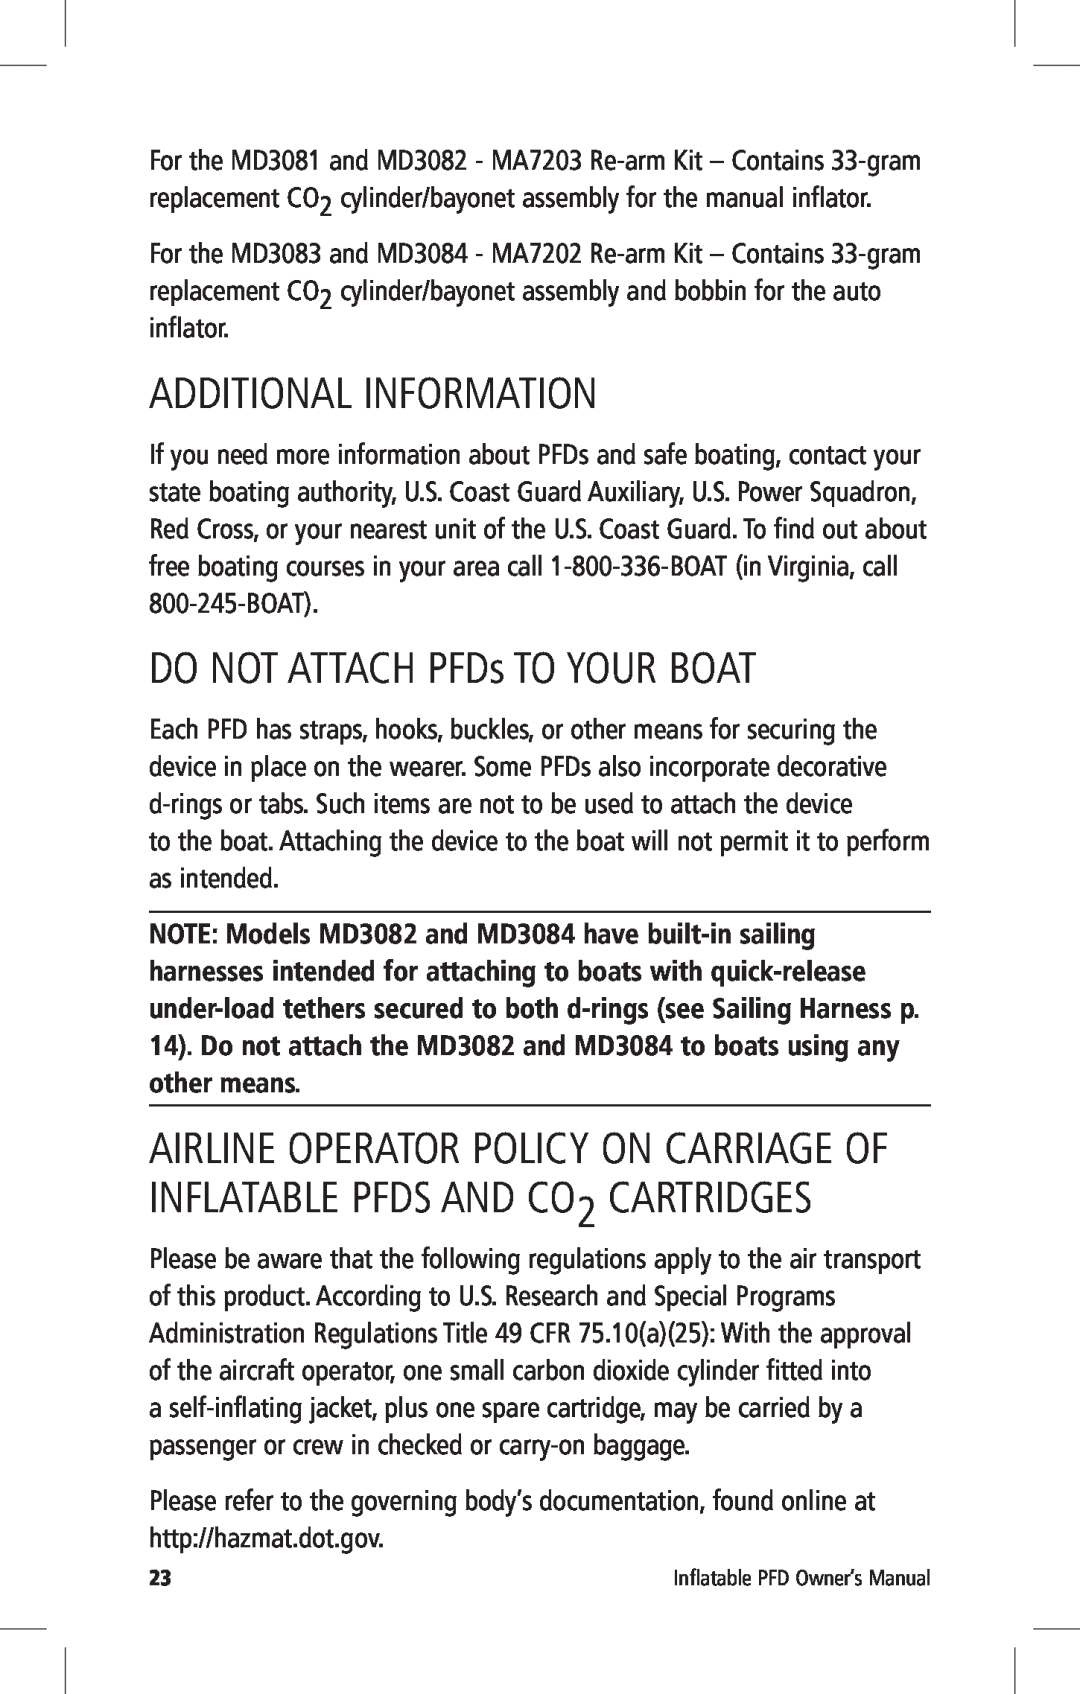 Mustang Survival MD3082, MD3084, MD3083, MD3081 manual Additional Information, DO NOT ATTACH PFDs TO YOUR BOAT 